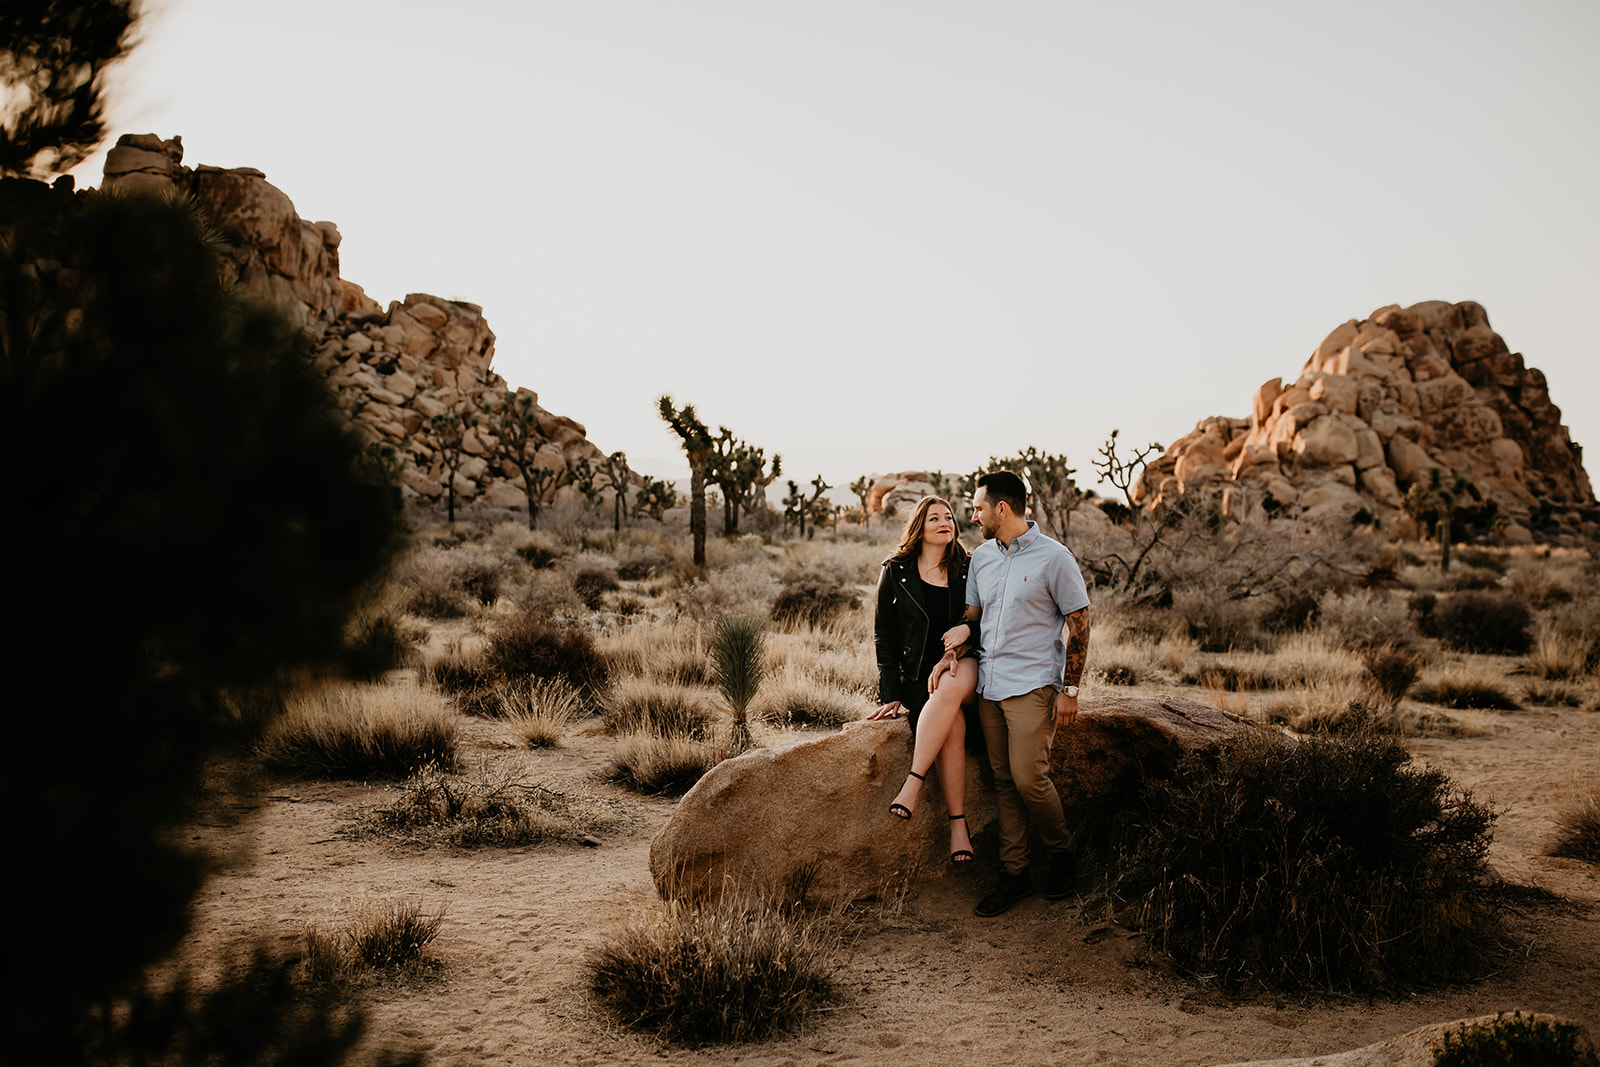 Couples surrounded by rocks and Joshua Trees in one of Californias most popular national parks